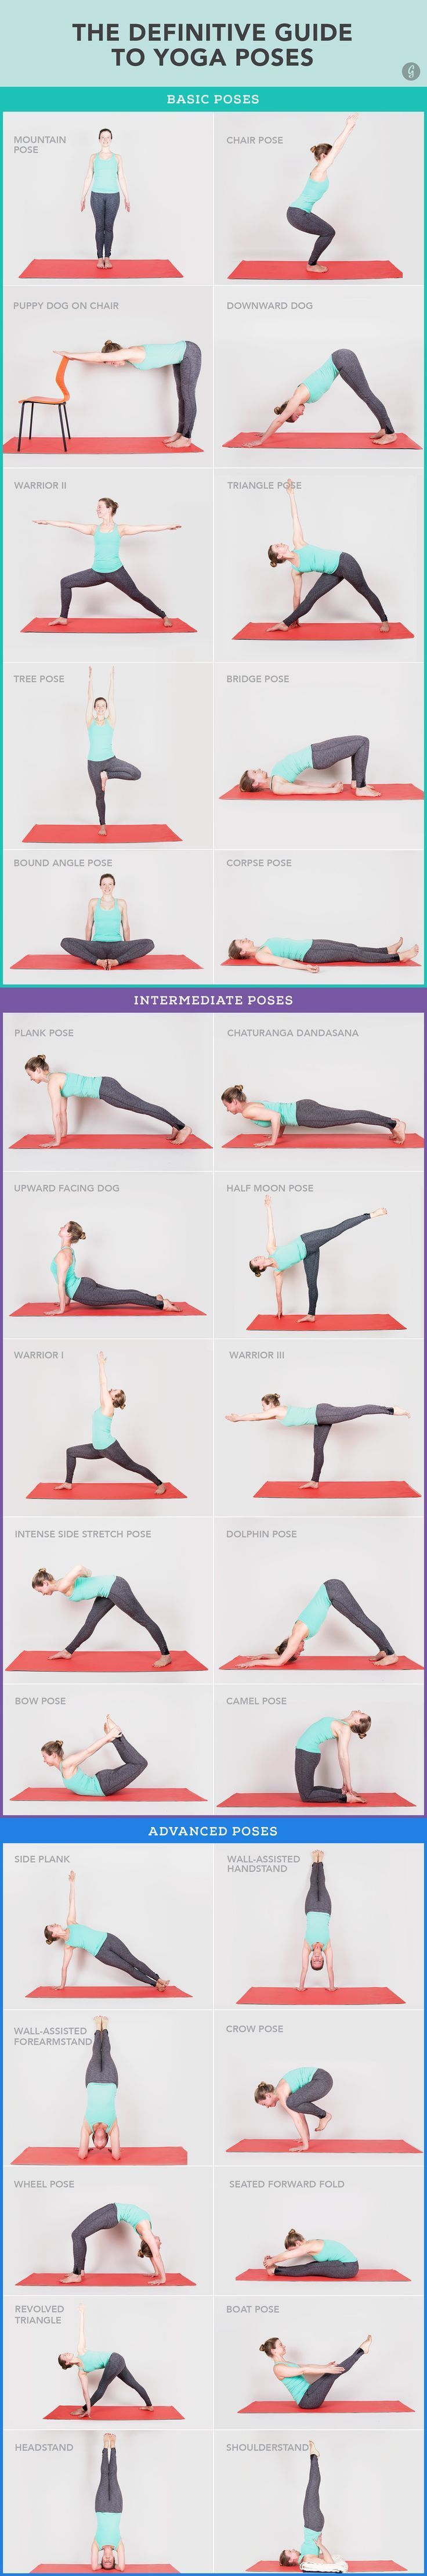 30 Yoga Poses You Really Need To Know #yoga #stretch #fitness